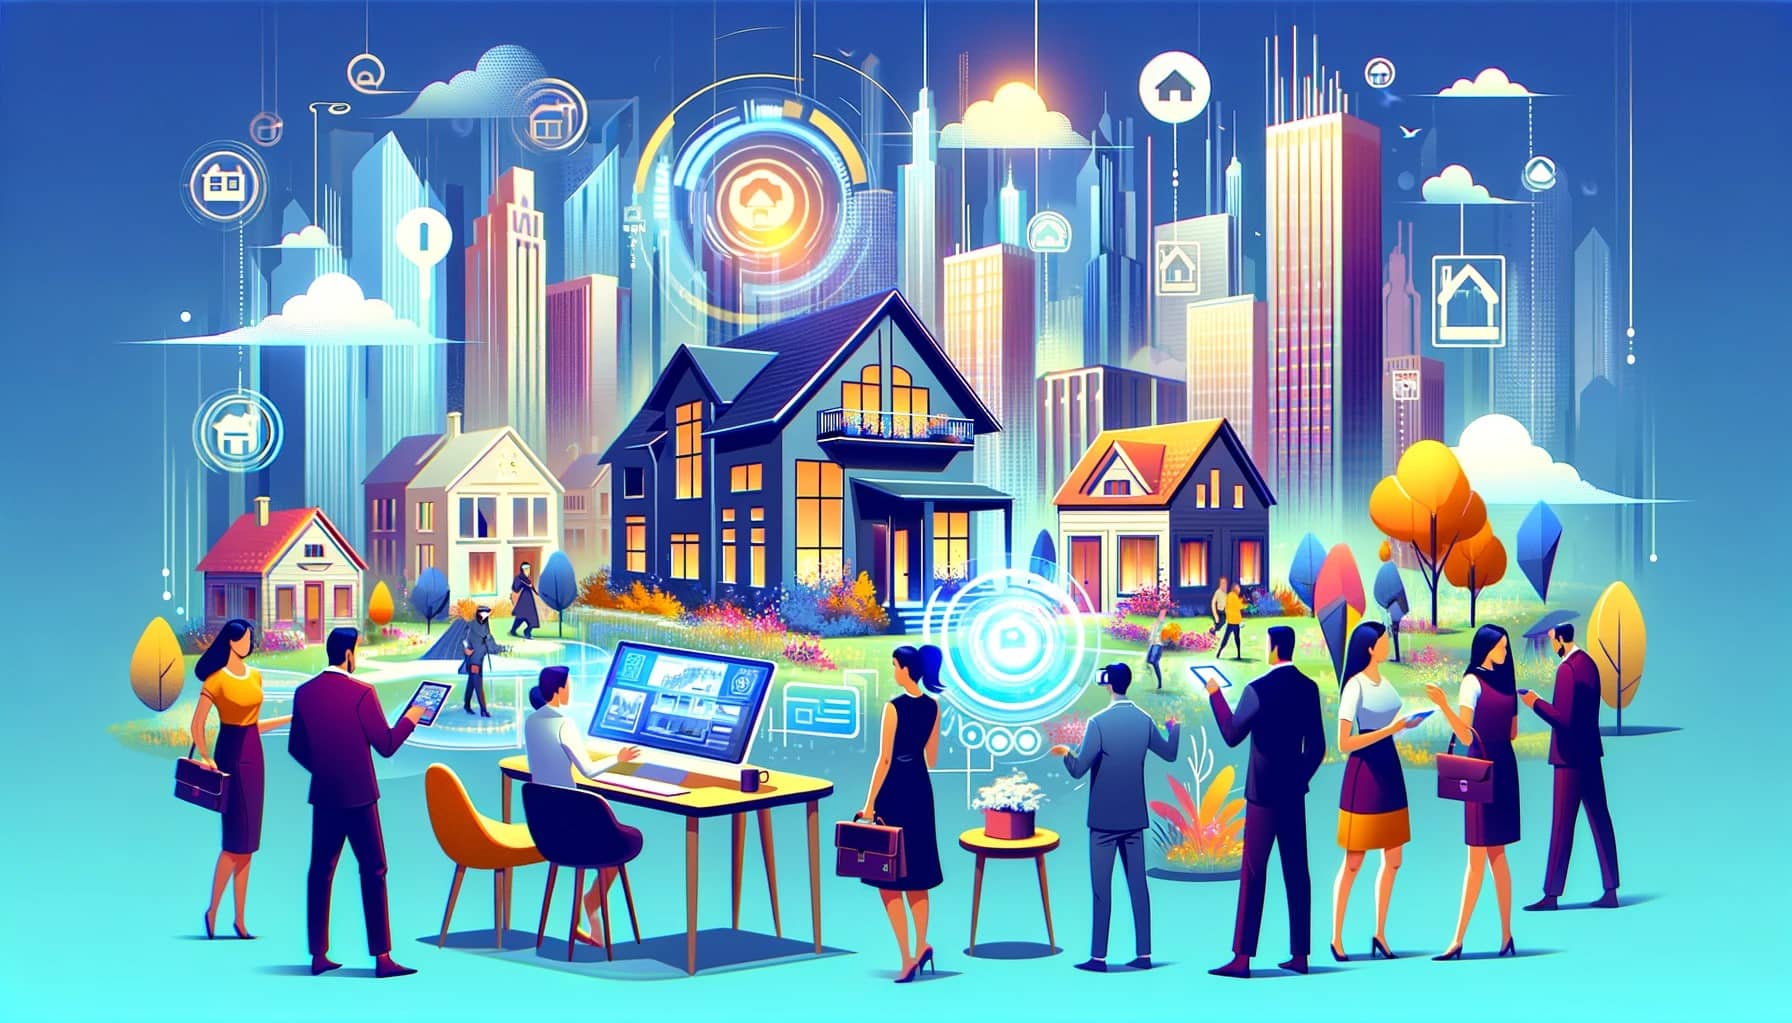 Futuristic cityscape with a real estate agent using advanced technology and diverse group of clients, symbolizing 2024 real estate marketing trends.